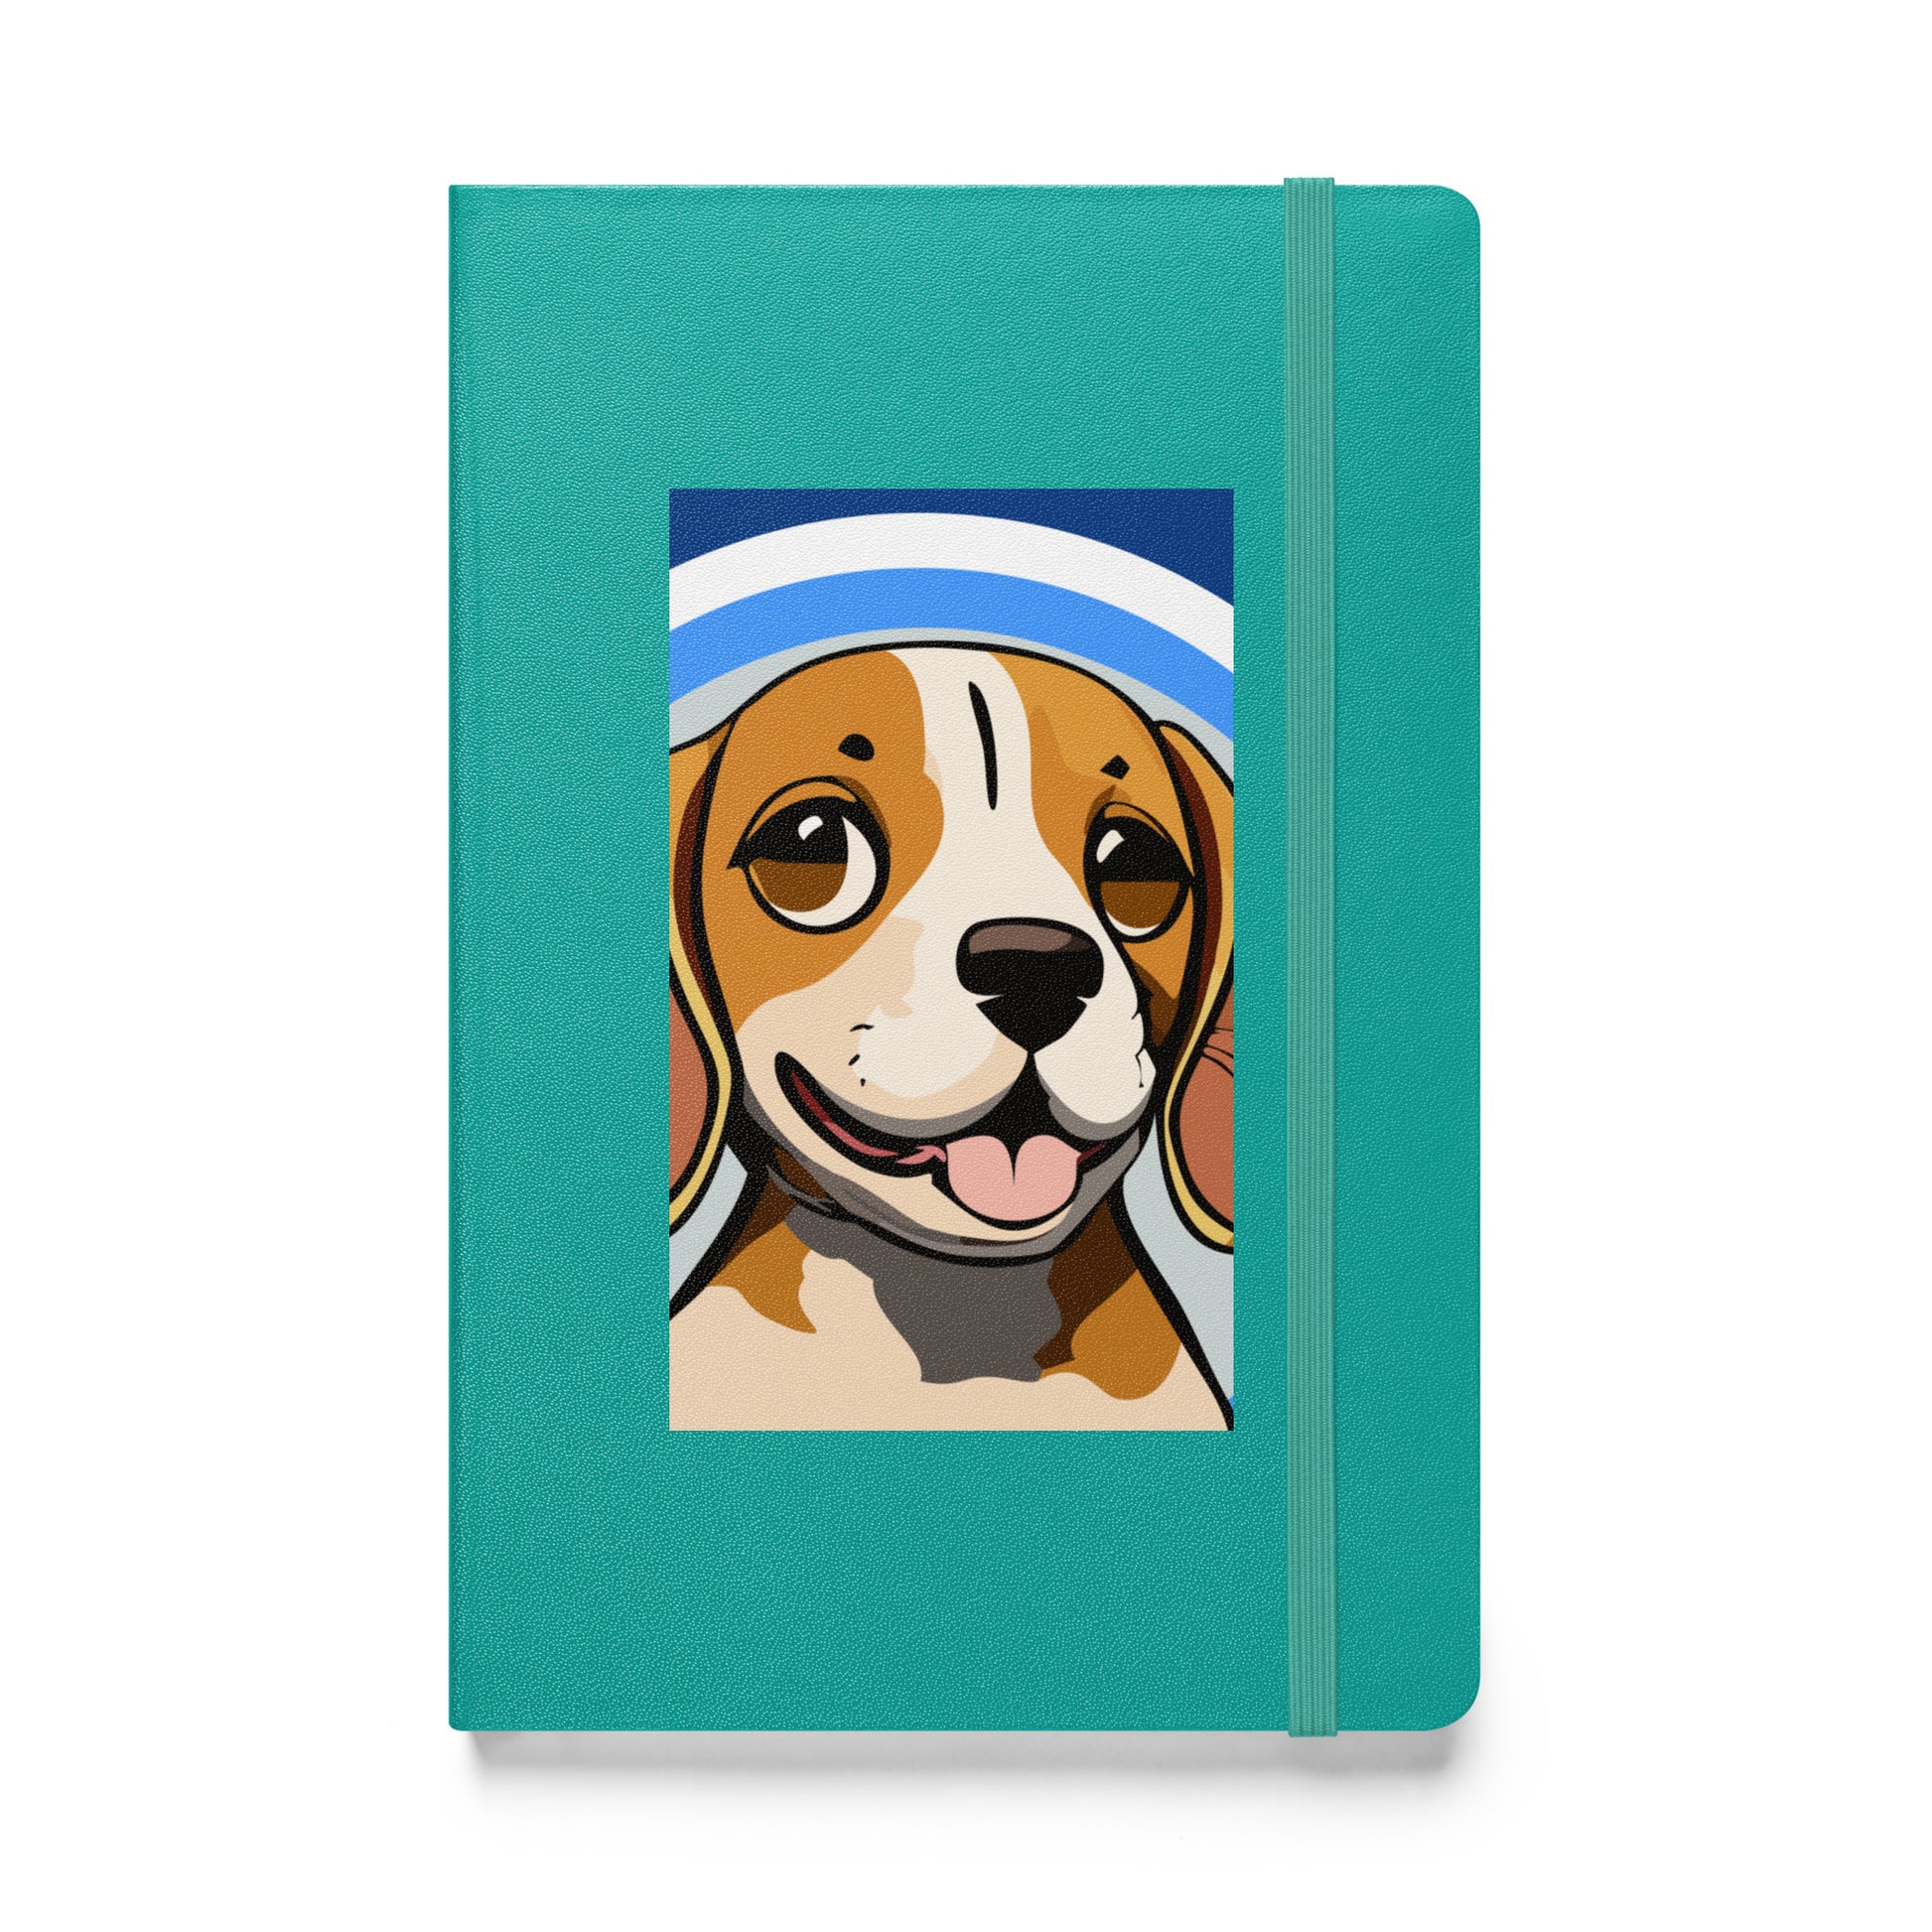 Hardcover notebook in turquoise color, with cute beagle on cover